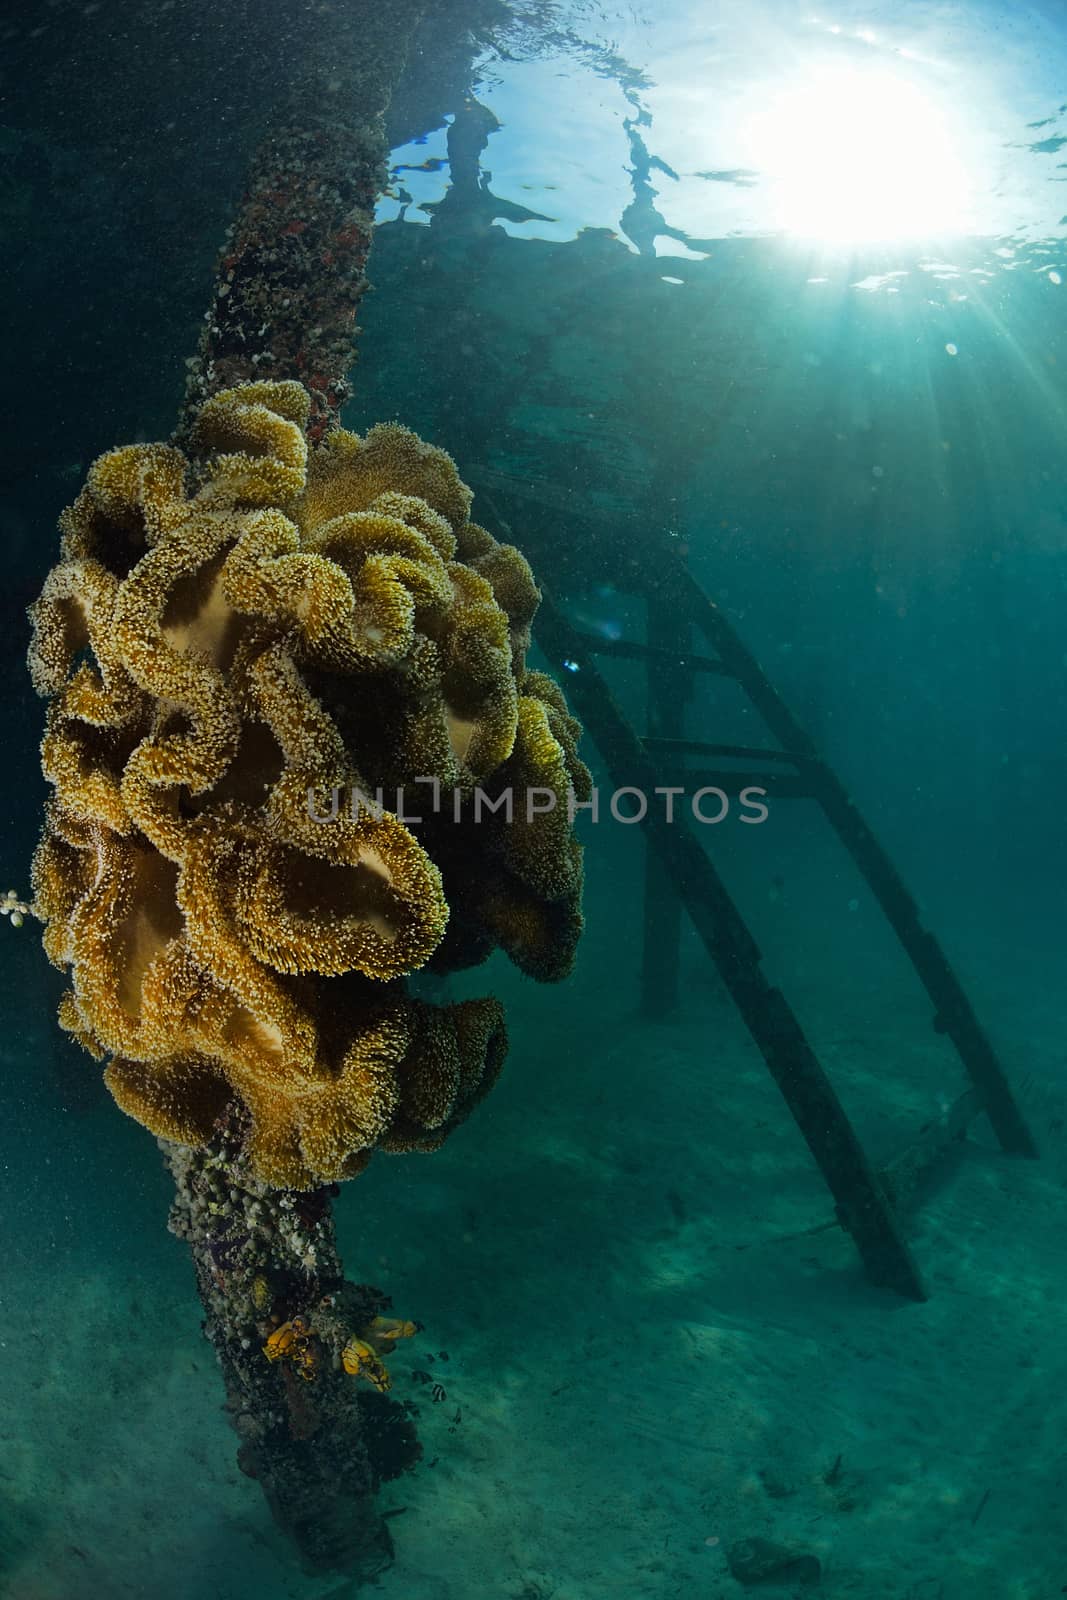 giant anemone at dive center in Mabul, Sipadan, Malaysia by think4photop